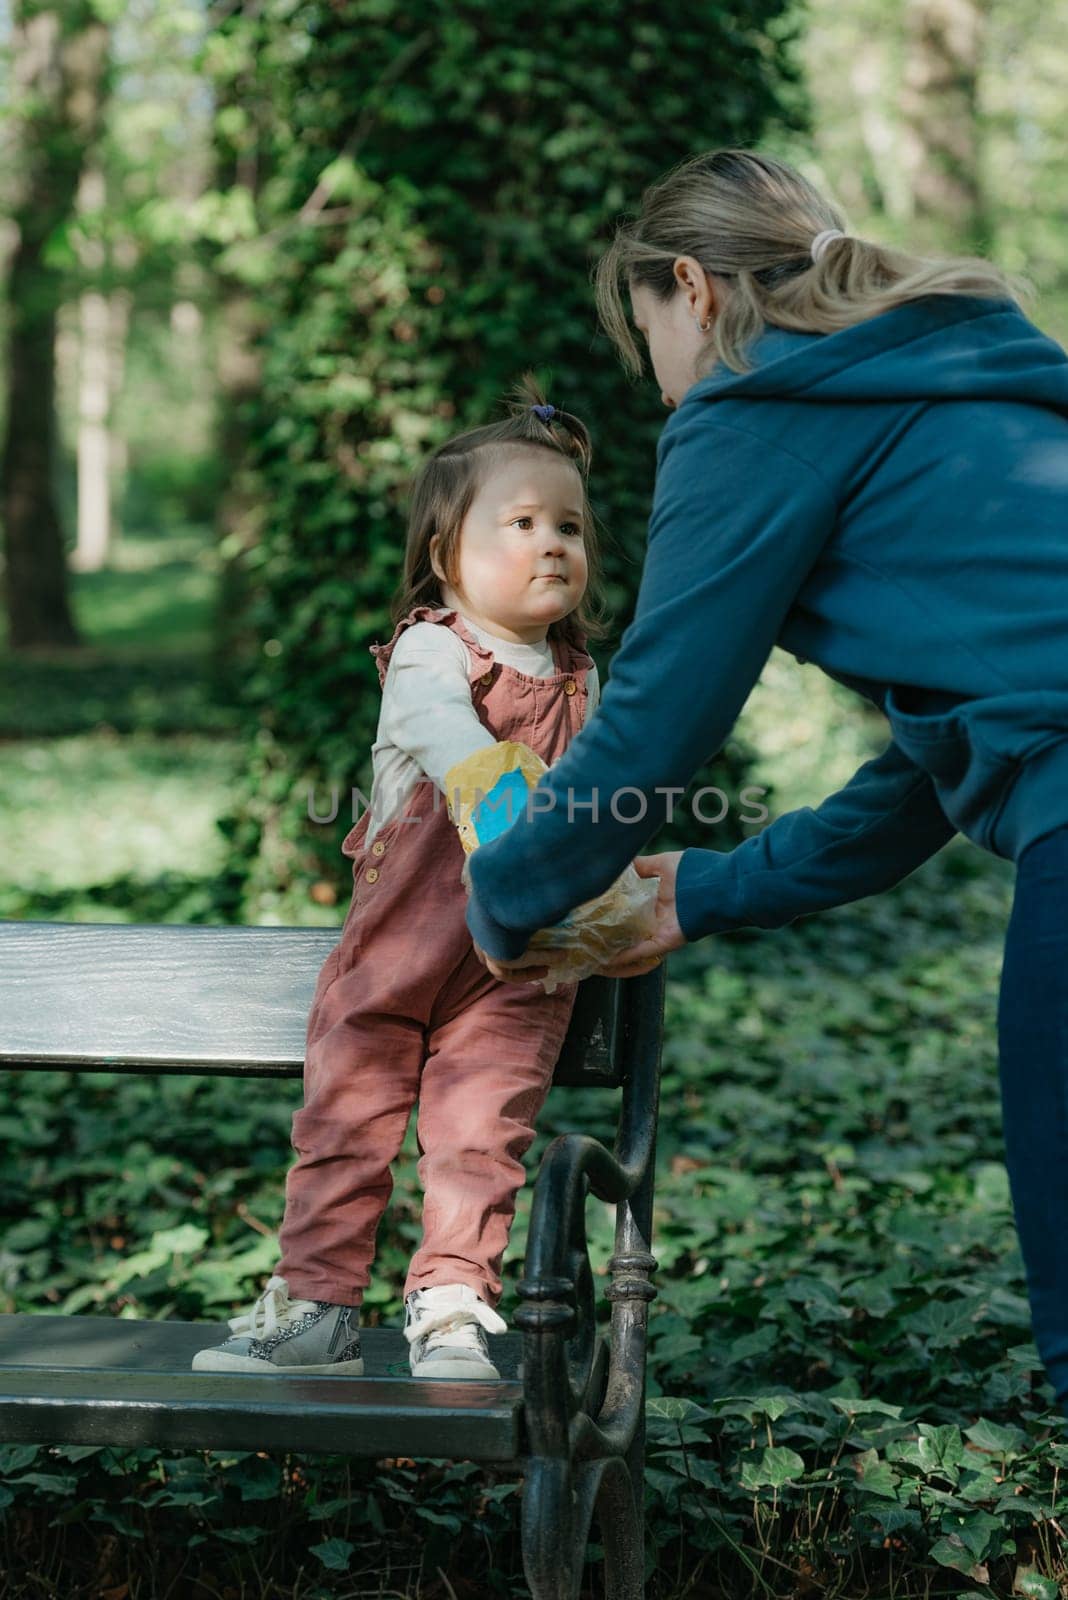 A mother with a ponytail feeds cookies to her little daughter in the park. A female toddler in velvet overall is having fun on the bench in the garden.